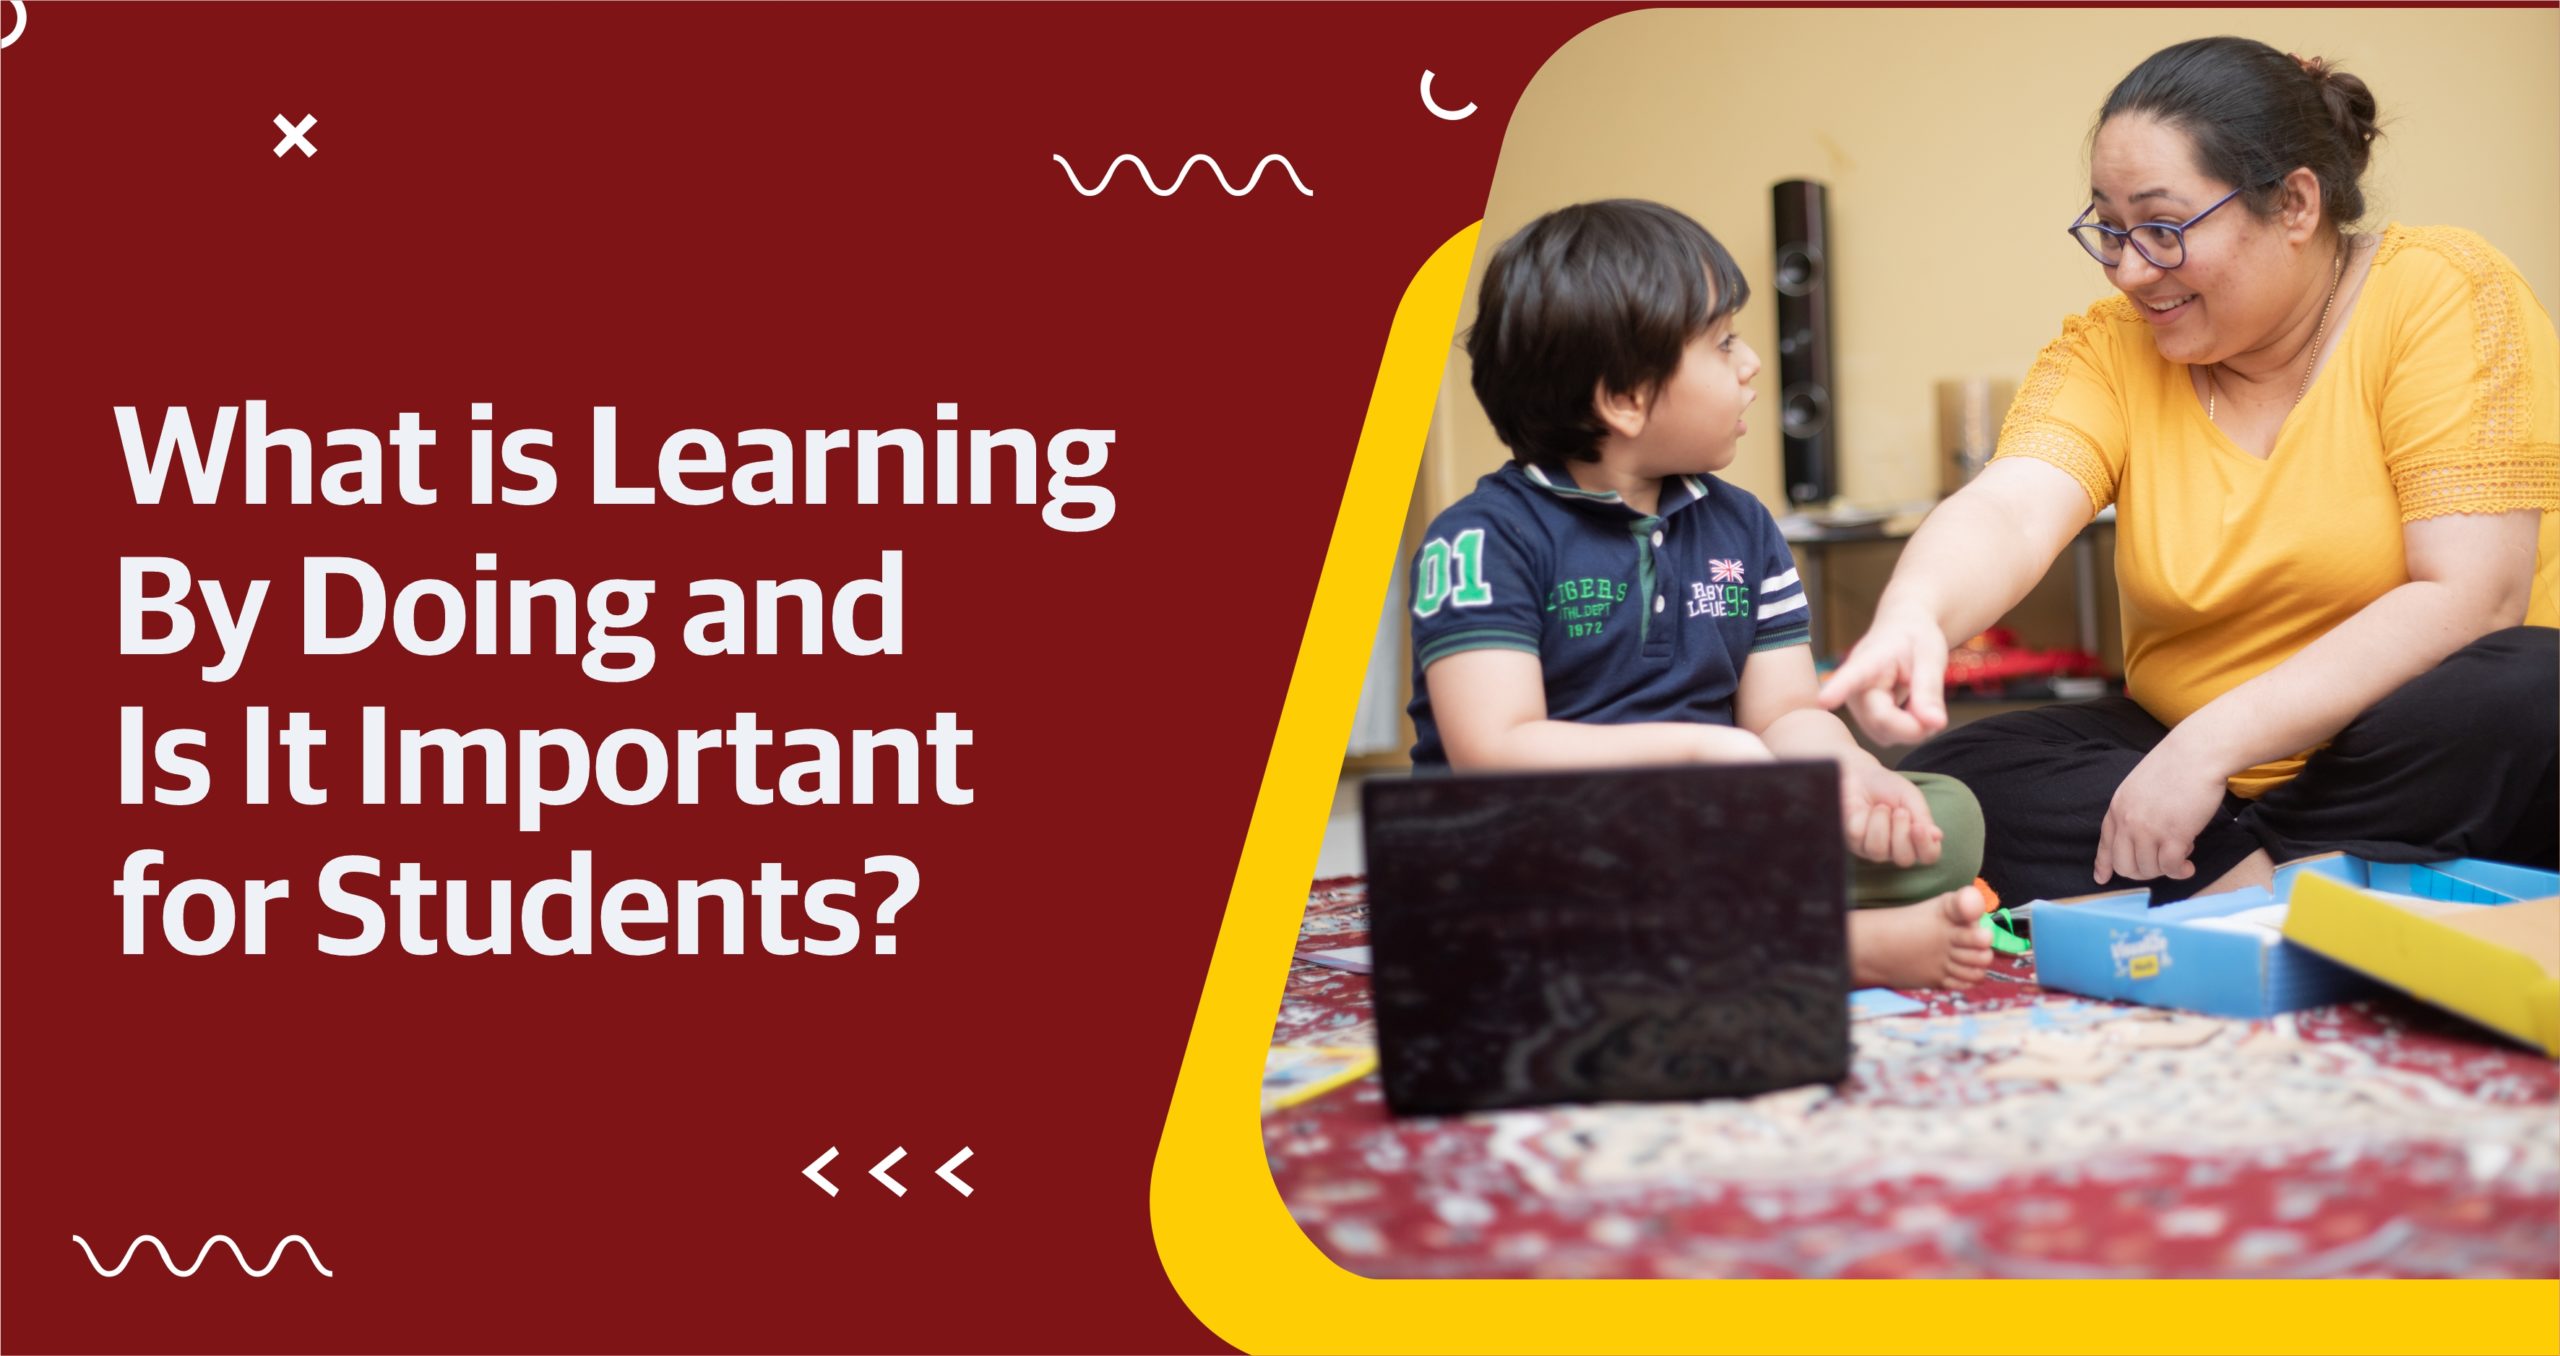 What is Learning by Doing and is it Important for Students?